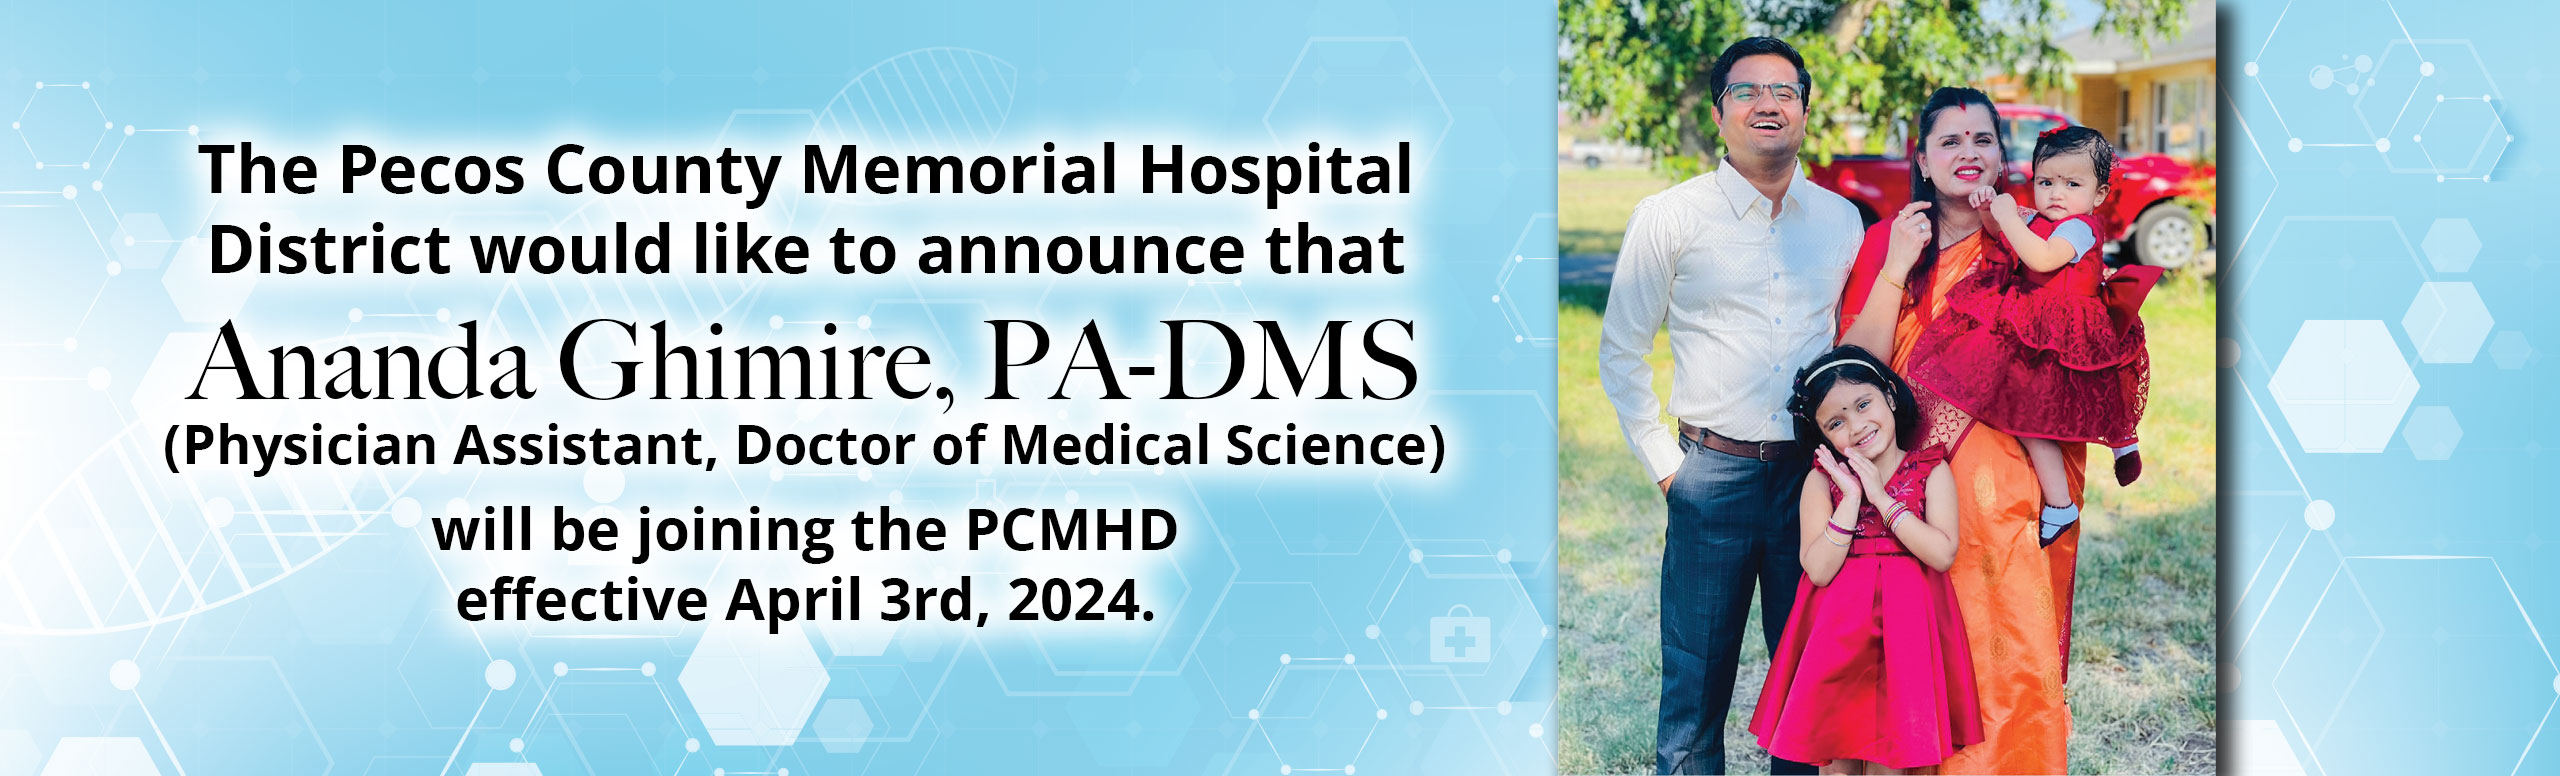 The Pecos County Memorial Hospital District would like to announce that Ananda Ghimire, PA-DMS (Physician Assistant, Doctor of Medical Science) will be joining the PCMHDeffective April 3rd, 2024.

Welcome, Dr. Ghimire!